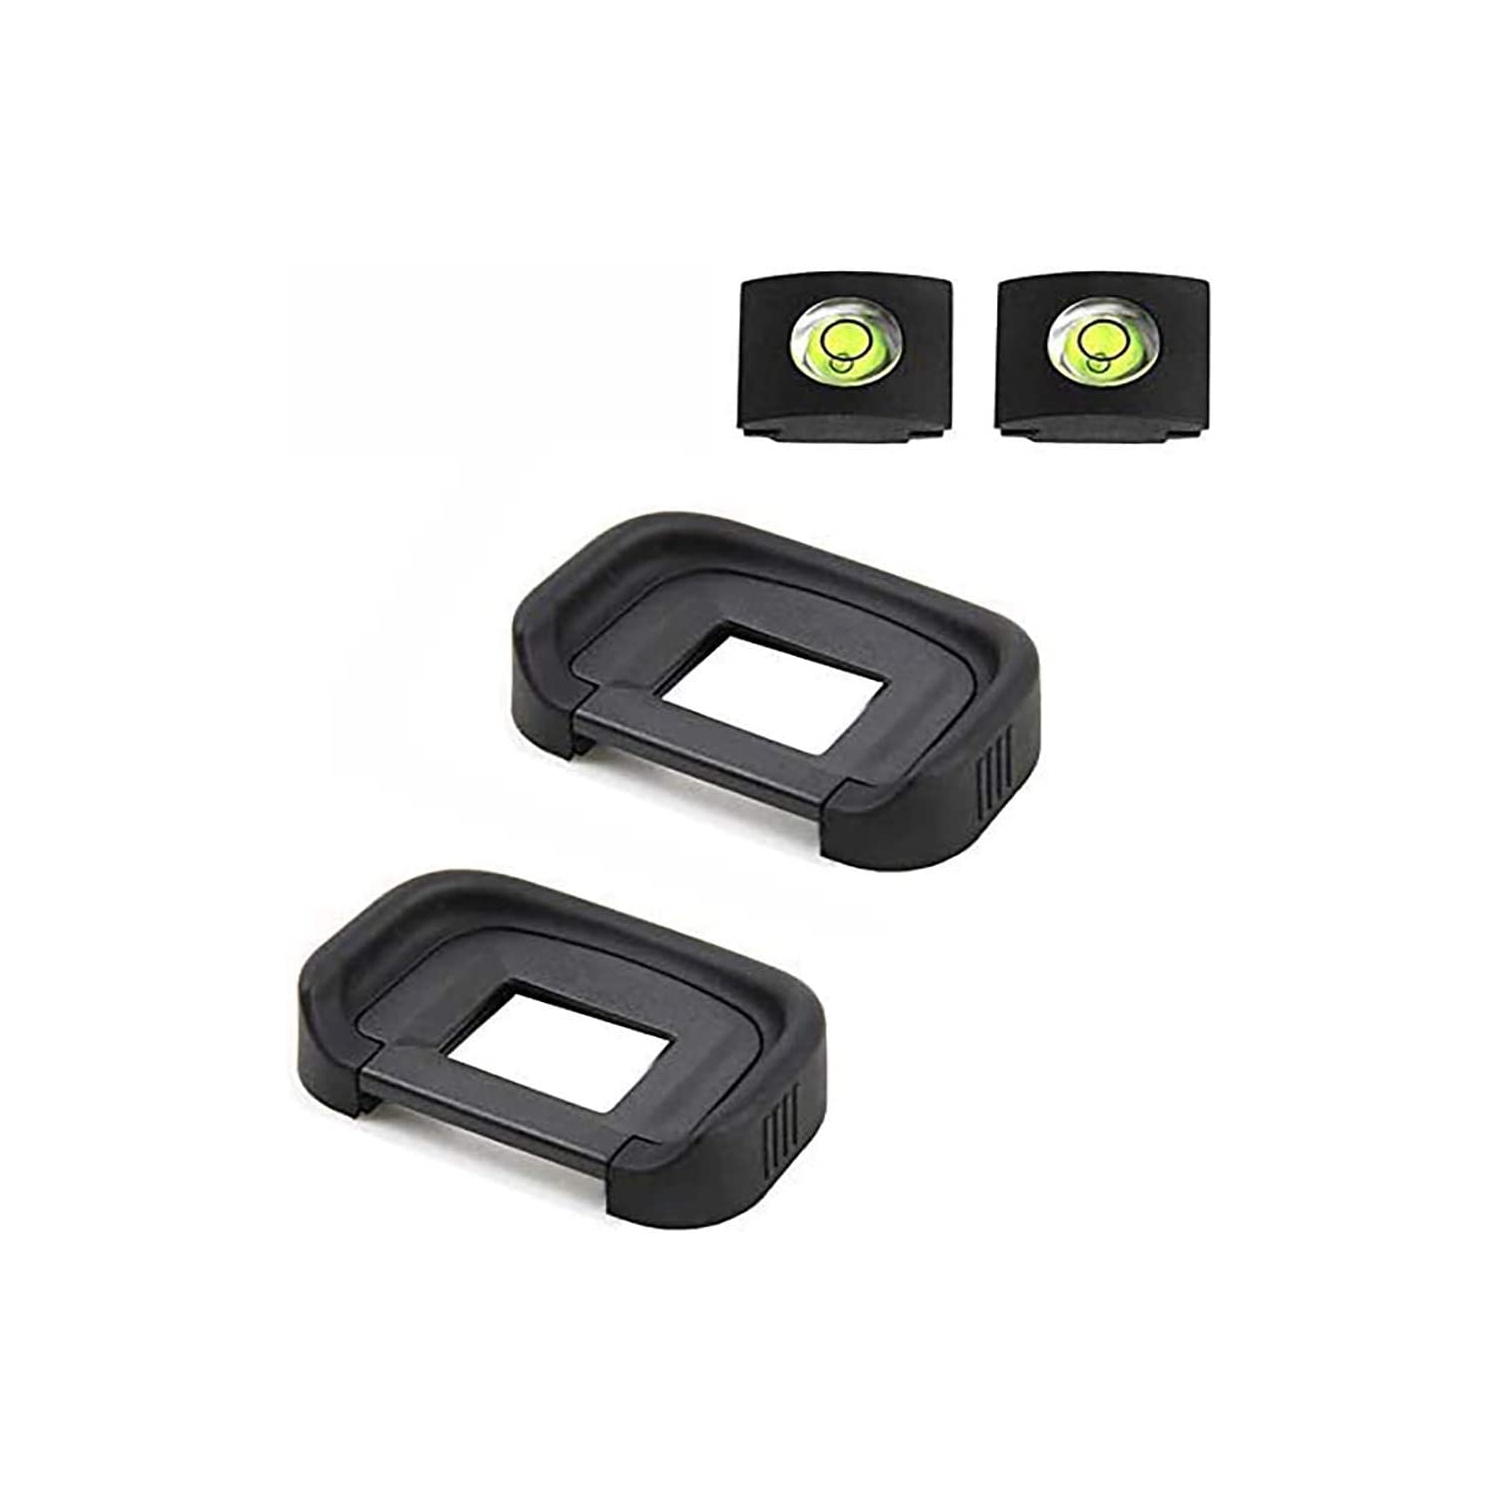 EB 80D 90D Eyepiece Eyecup Viewfinder Eye Cup for Canon EOS 90D/80D/70D/60D/50D/40D/20D/5D Mark II/5D Mark I/6D Mark II/6D Mark I Camera (2-Pack), ULBTER viewfinder Eyecup with Hot